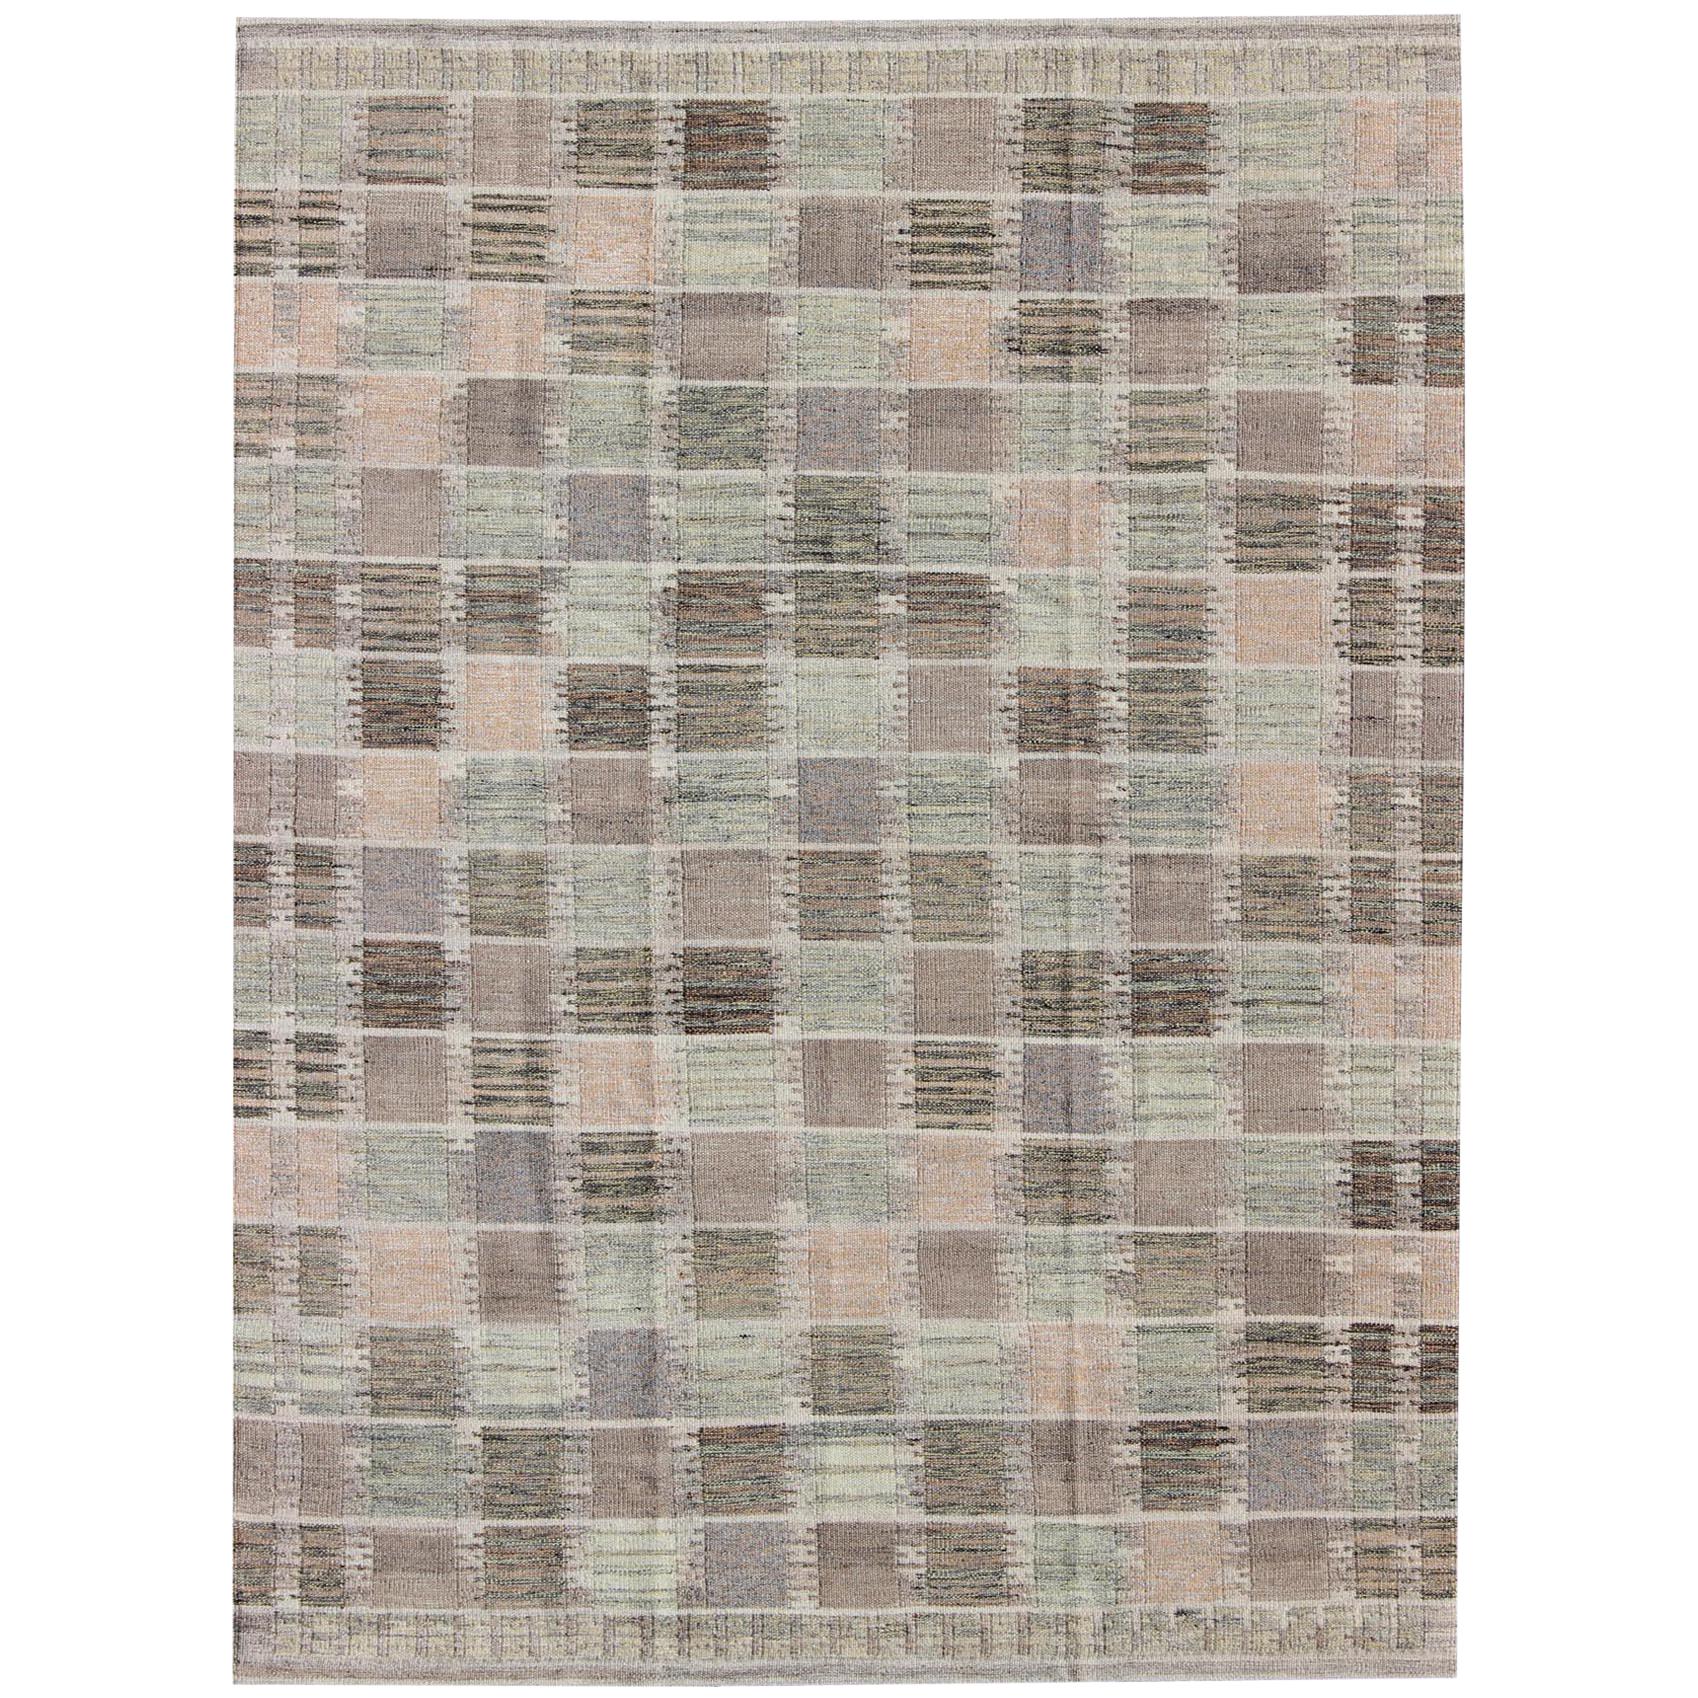 Modern Checkerboard or Patchwork Scandinavian Flat Weave Rug in Neutral Colors